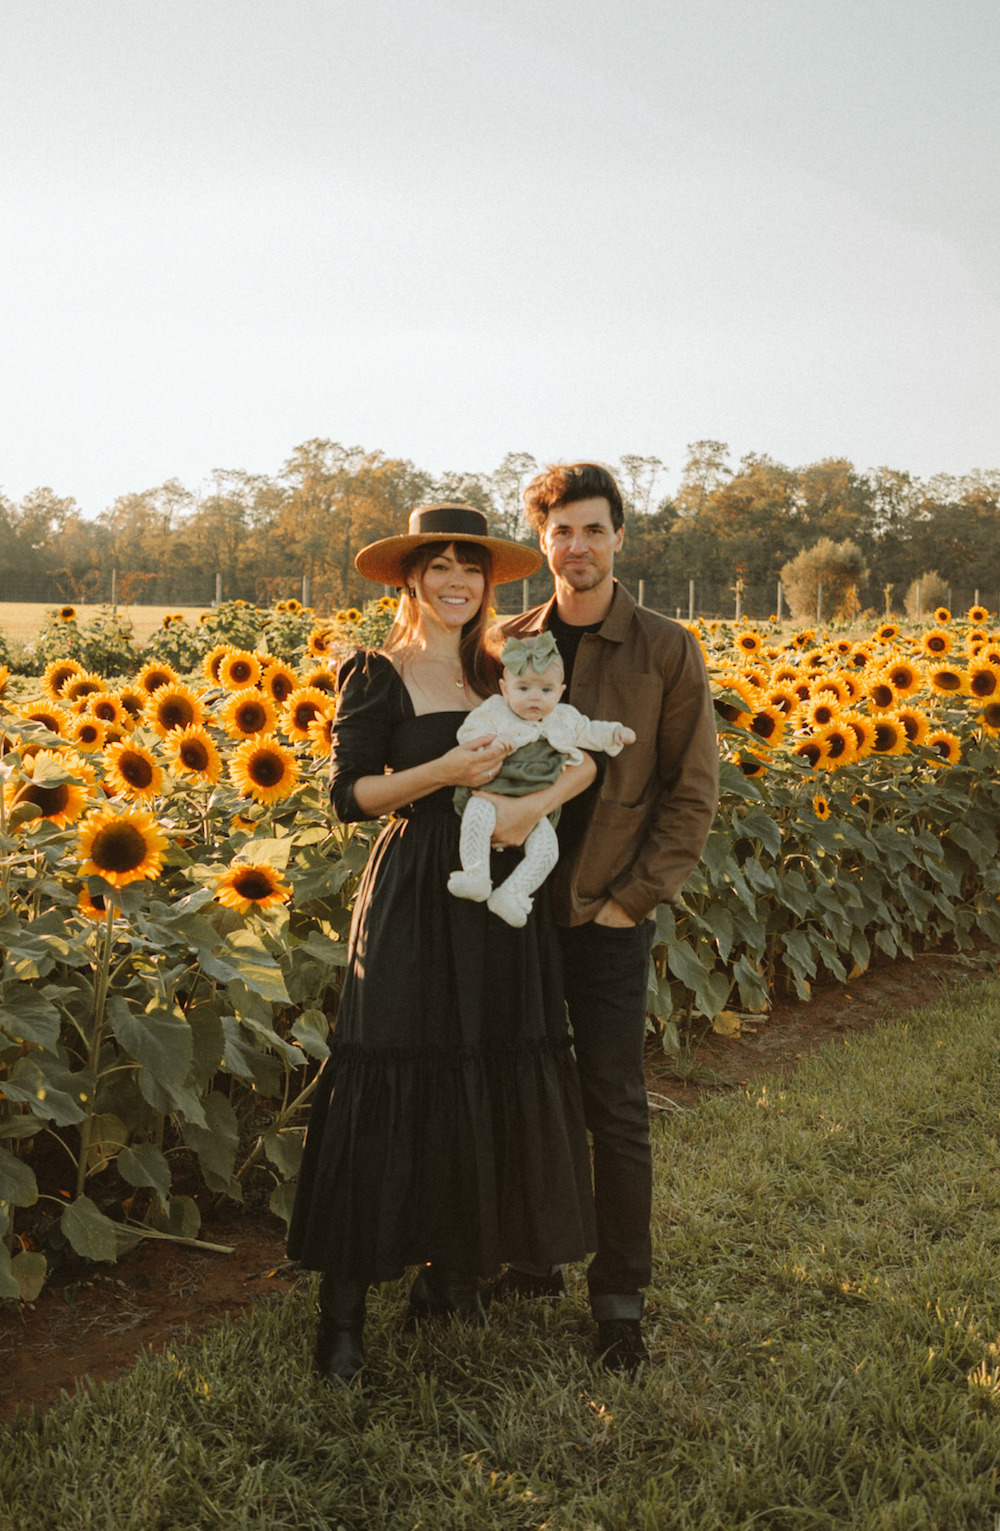 image of a family in a sunflower field, the mom wearing a black maxi sundress, the dad in a brown jacket and dark pants, and the baby in an ivory jumper